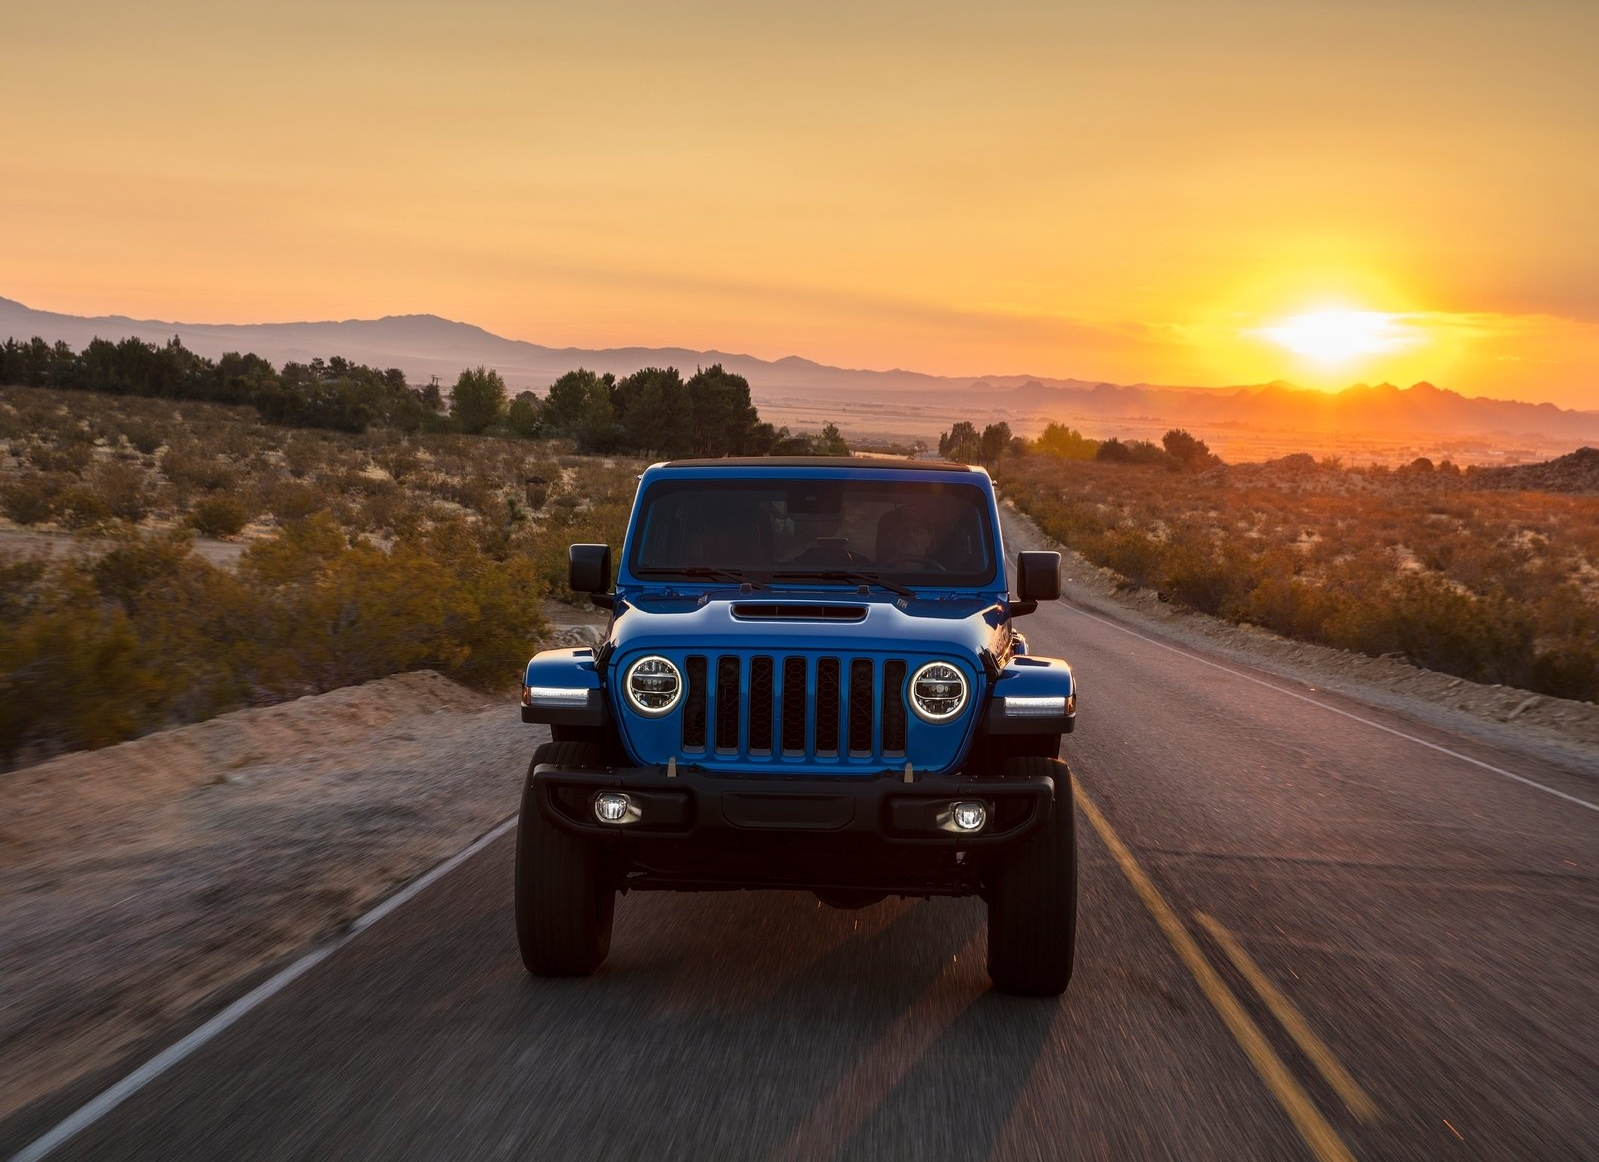 Jeep Wrangler Rubicon 392 On The Road